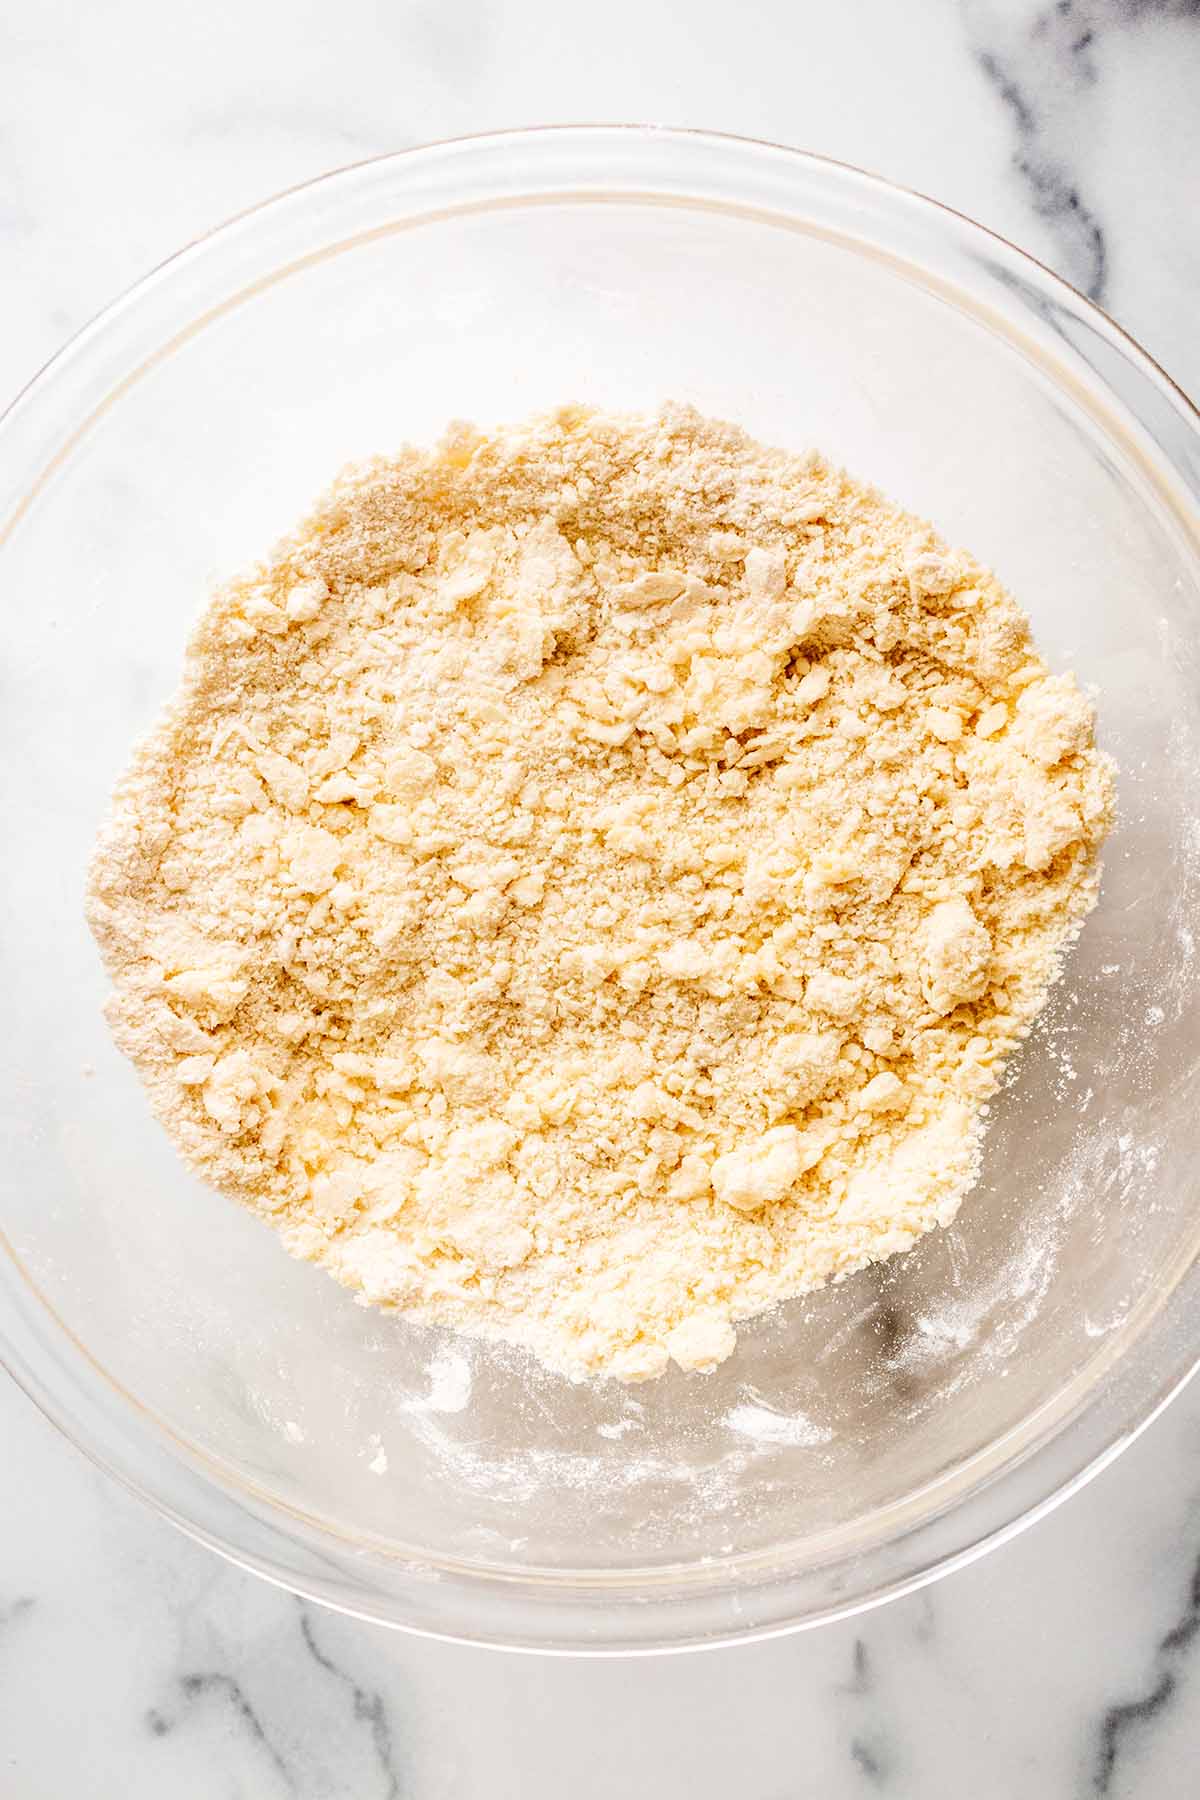 Overhead view of flour and butter mixture after being mixed in a large glass bowl.